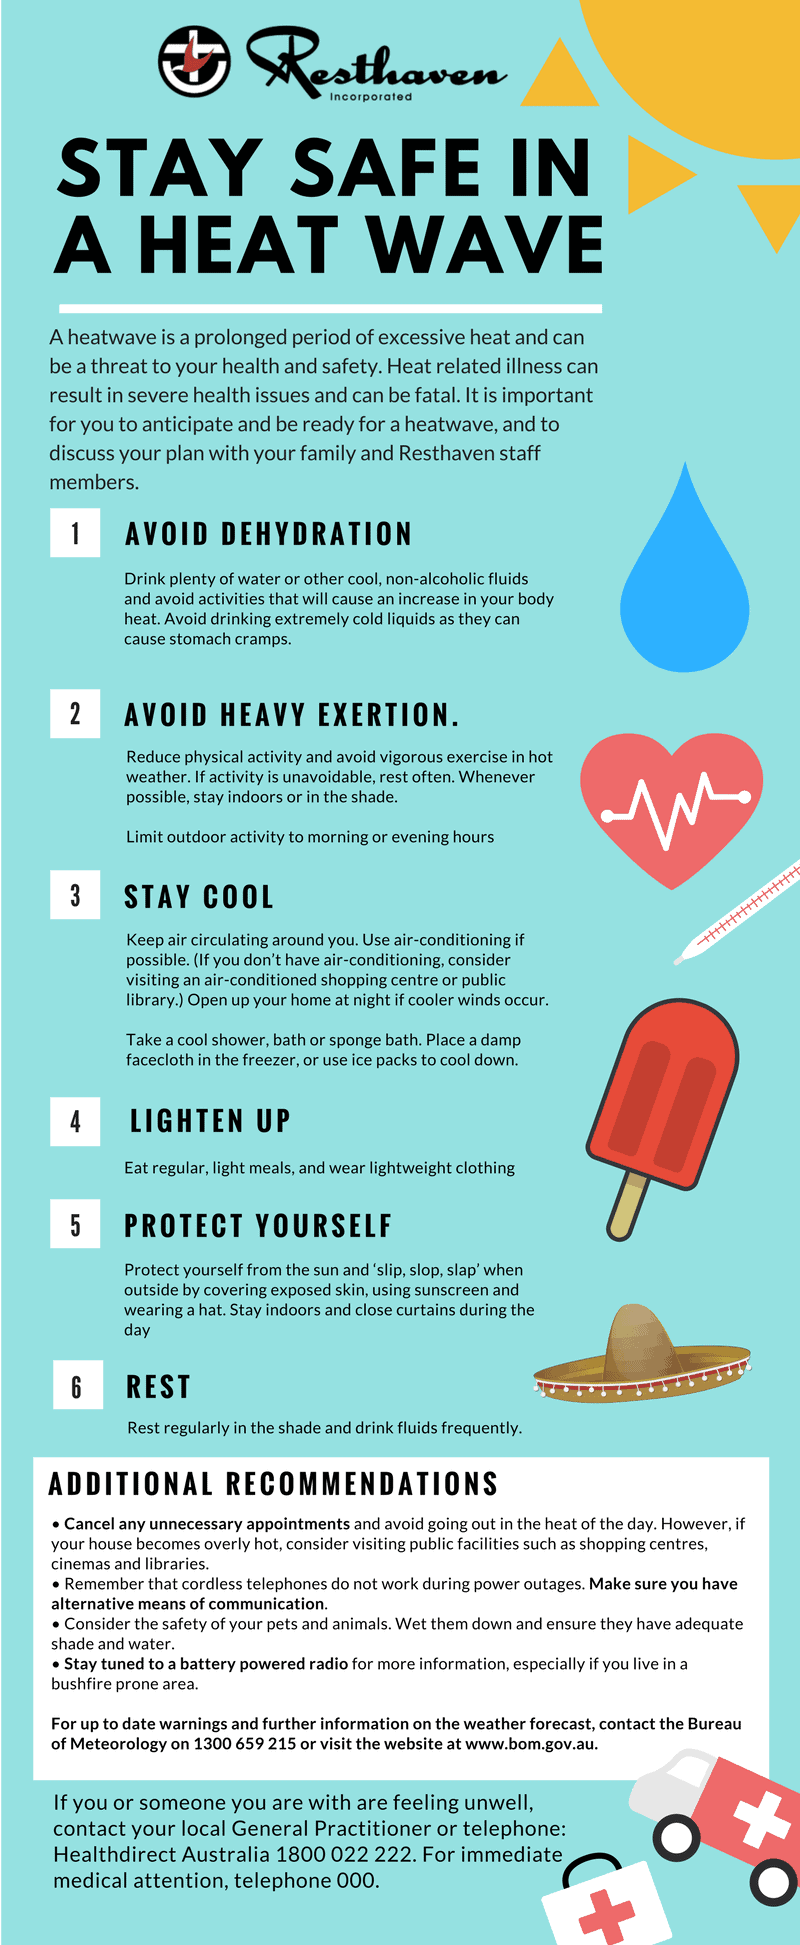 Stay safe in a heatwave